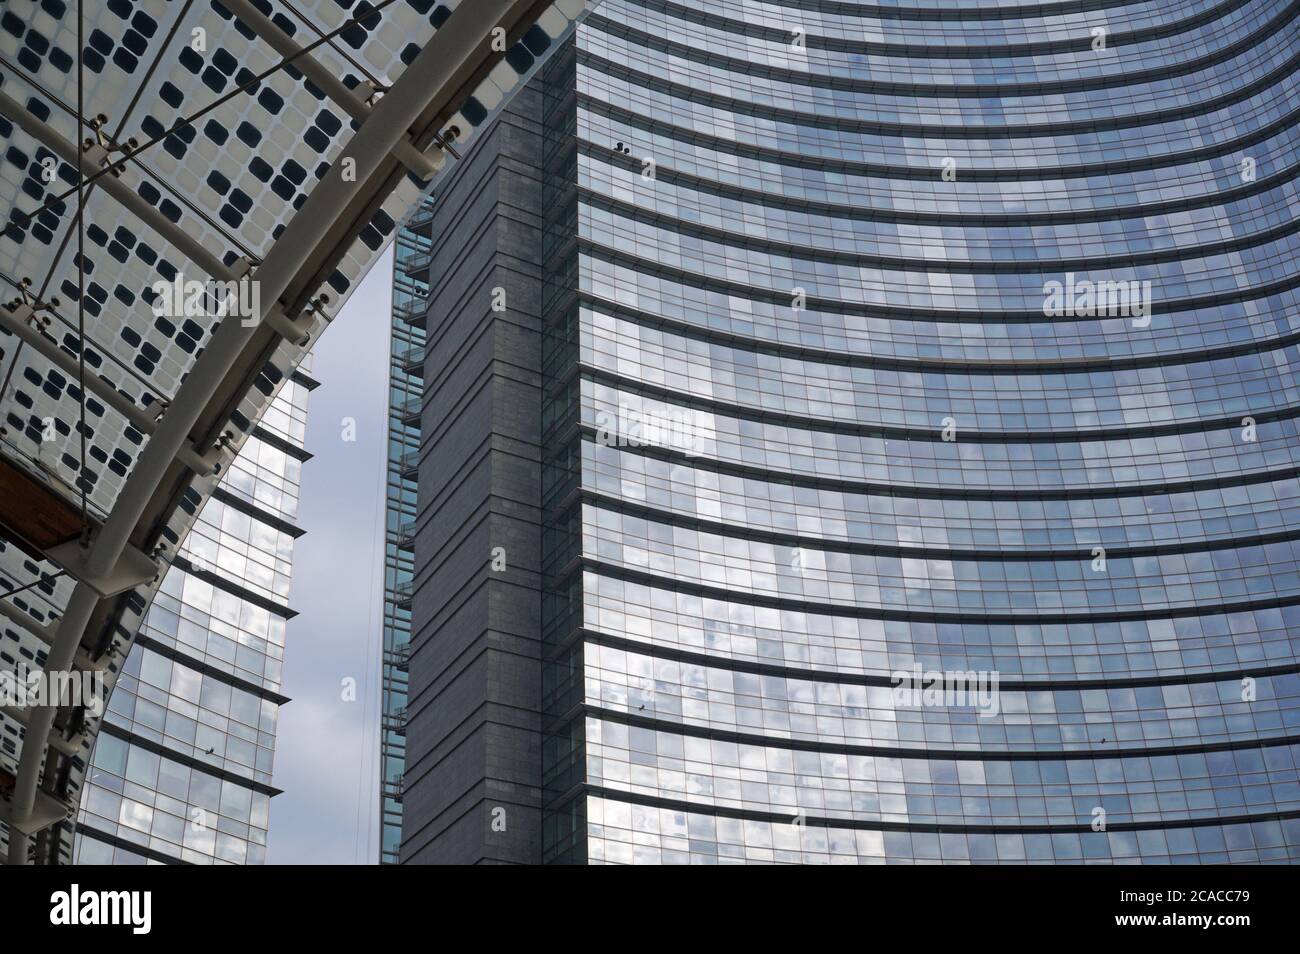 detail of Torre Unicredit (Unicredit Tower), designed by Cesar Pelli, Porta Nuova, Milan, Italy Stock Photo